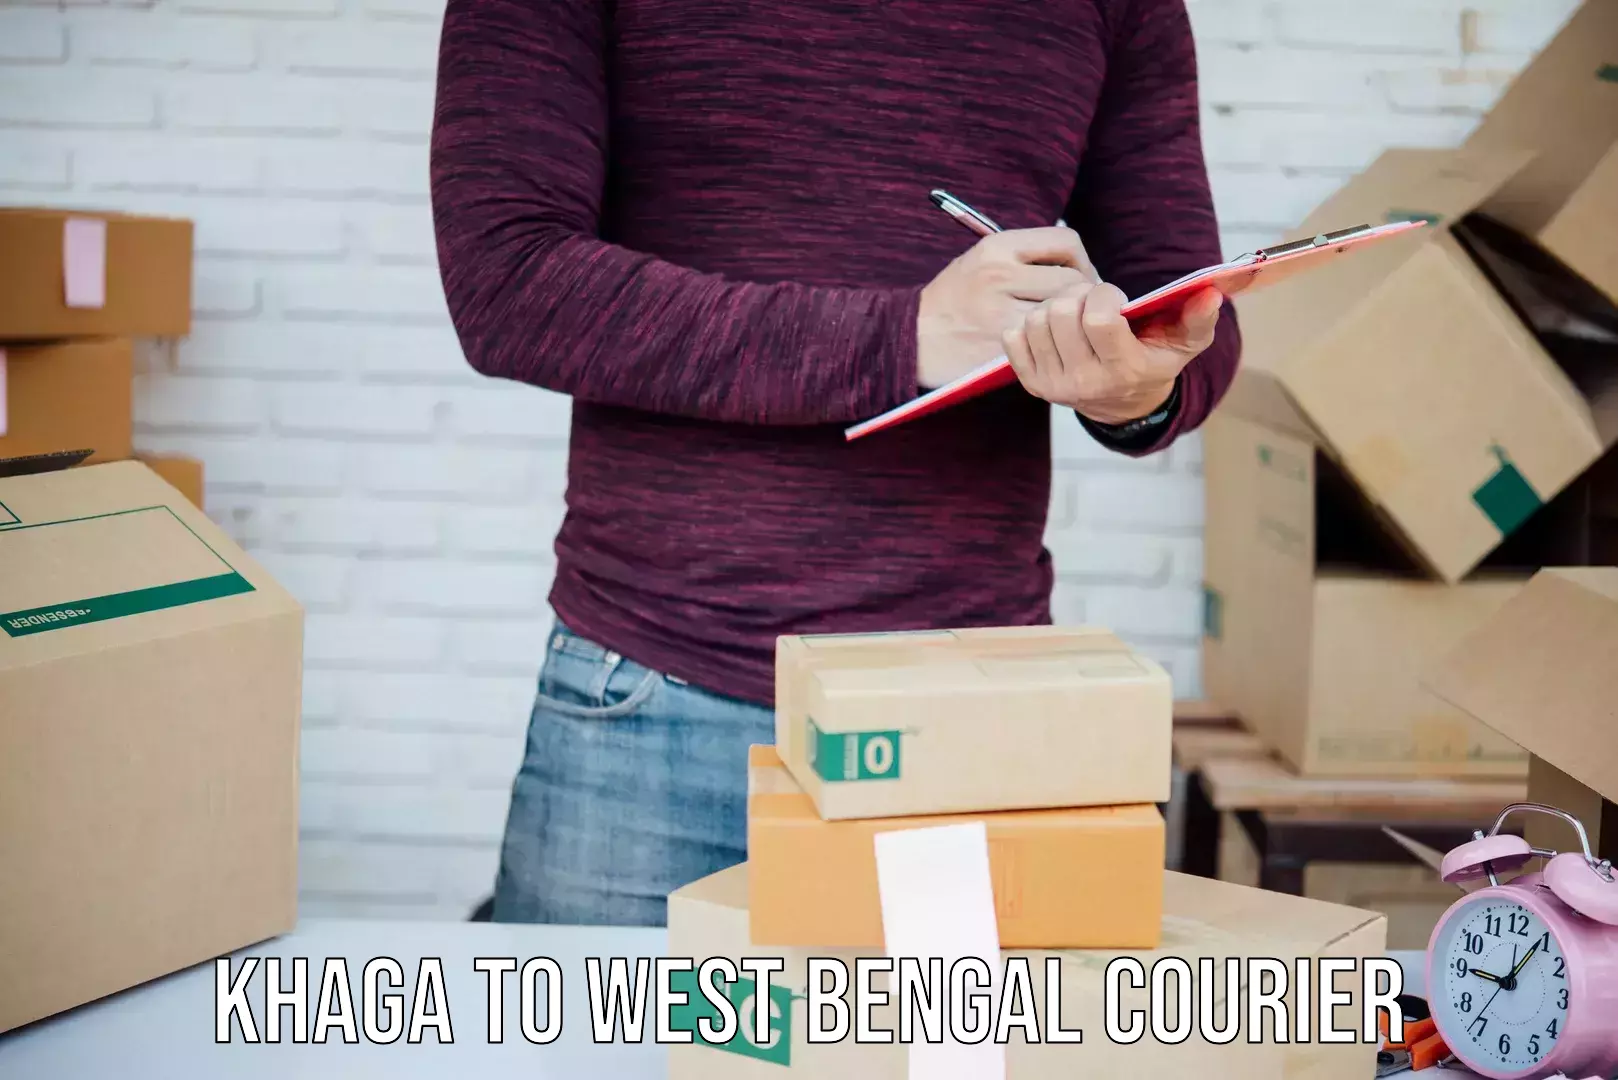 High-priority parcel service Khaga to West Bengal